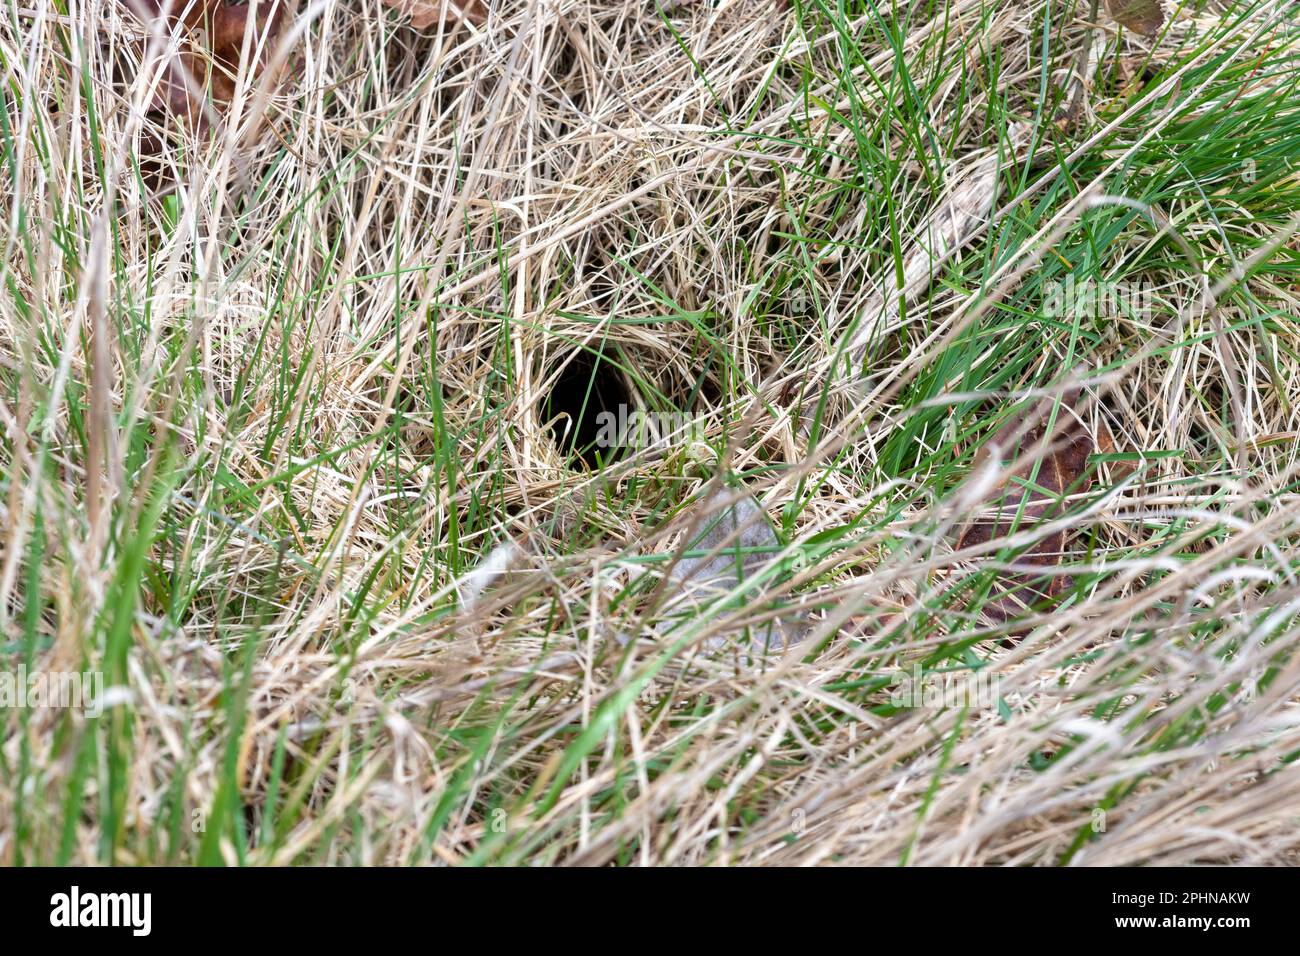 Field vole signs (Microtus agrestis), entrance to network of tunnels through long grass made by the small mammal, England, UK Stock Photo